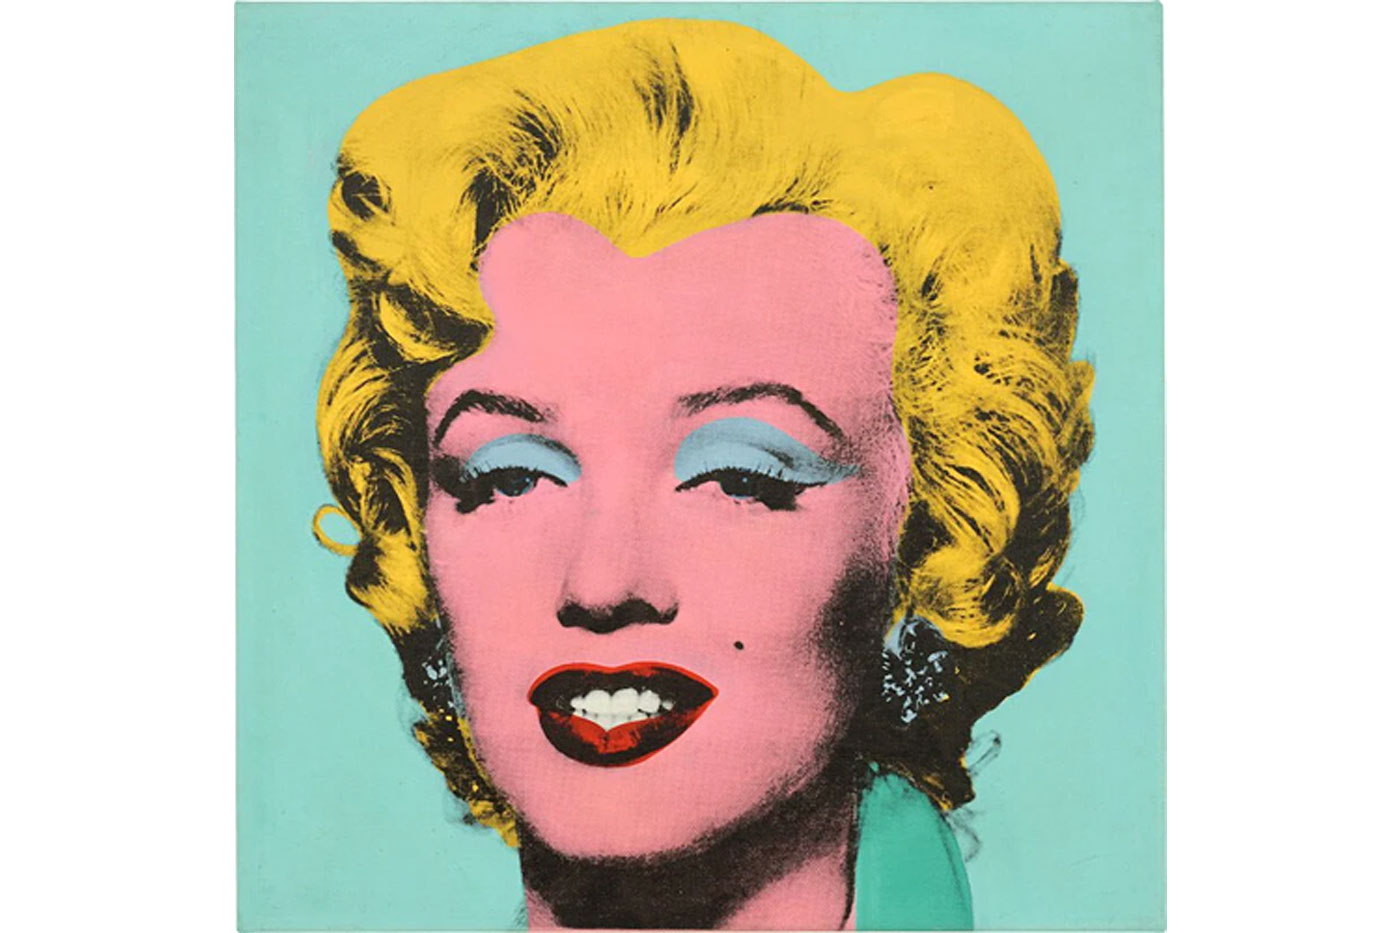 Andy Warhol's Shot Sage Blue Marilyn Painting Goes to Auction  For an Estimated Price of $200 Million USD christies new york  american actress Thomas and Doris Ammann Foundation Zurich sillkscreen canvas Dorothy Podber story news